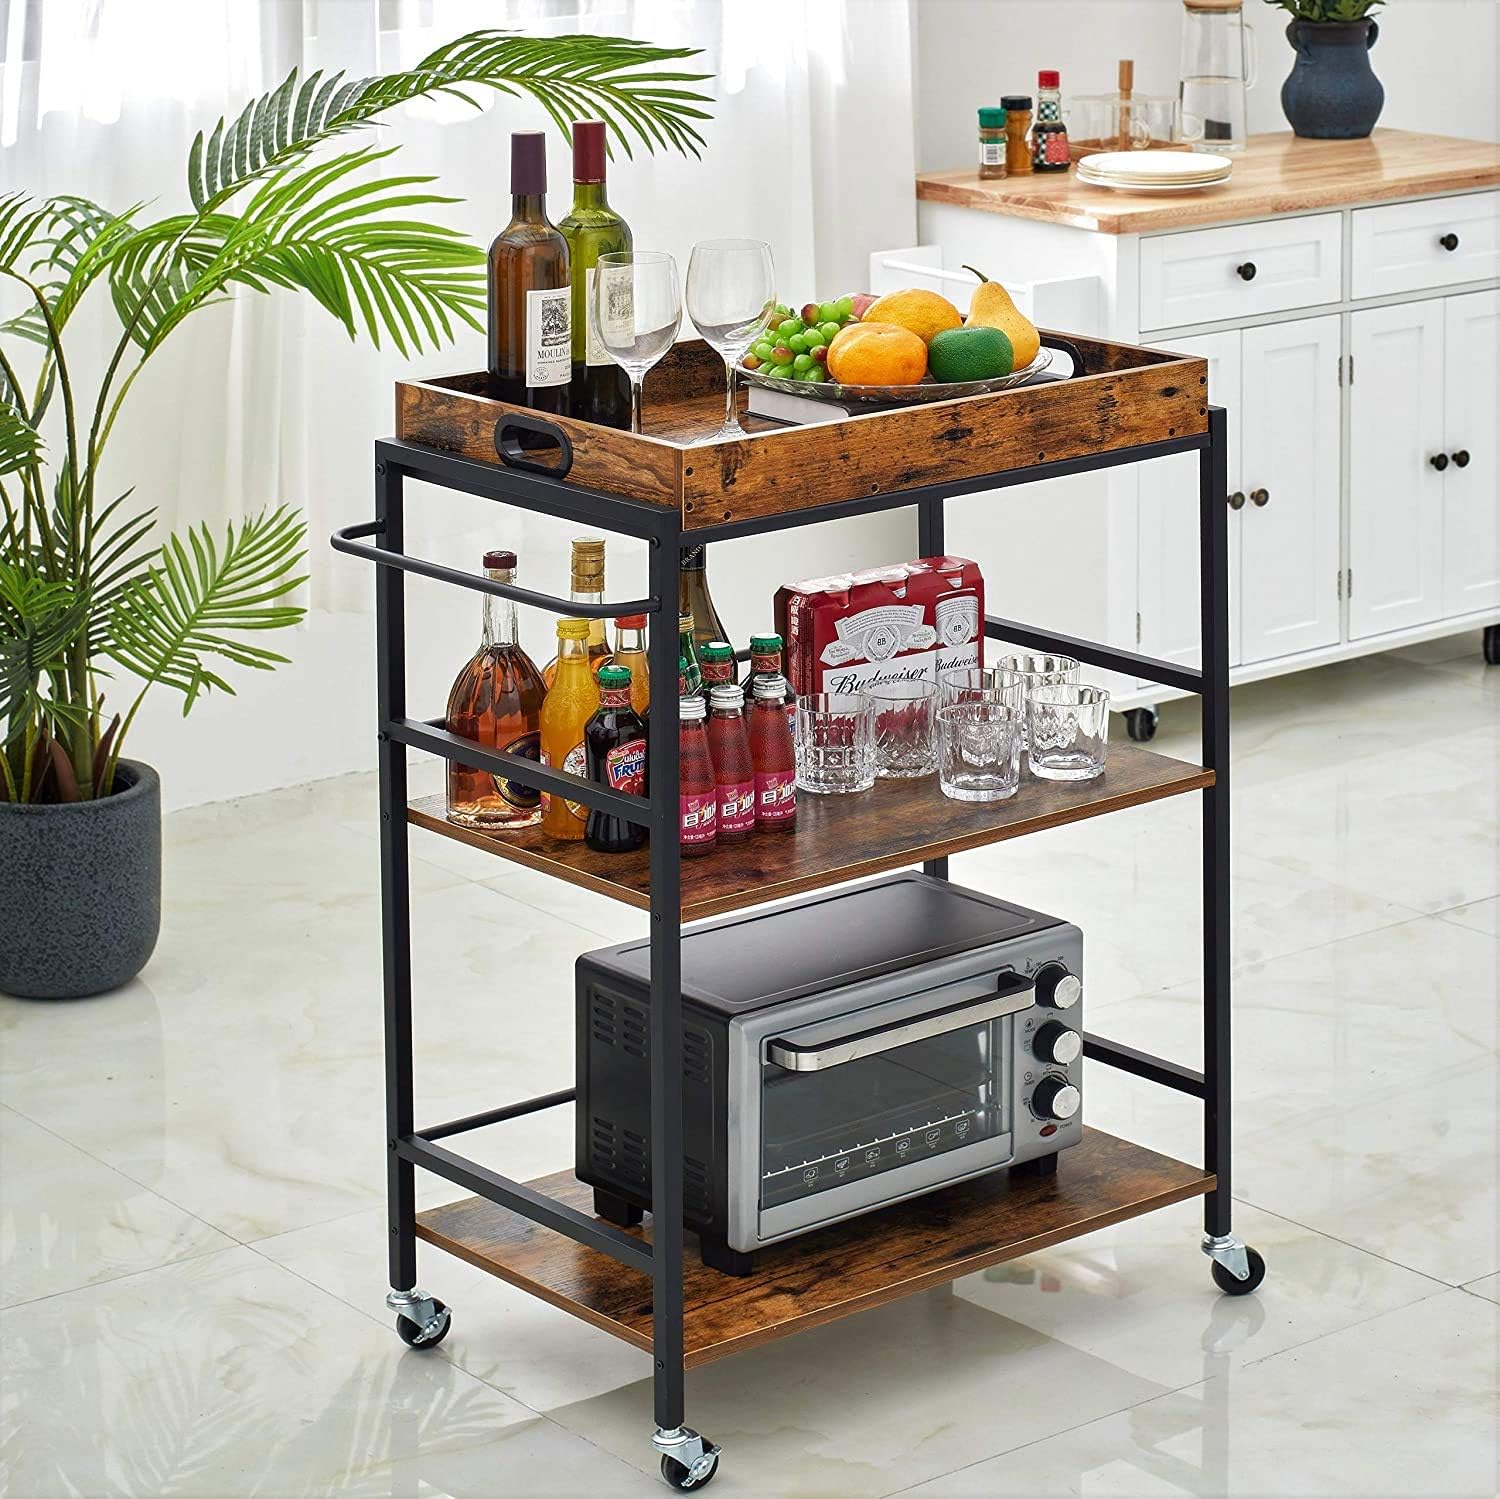 Generic Kealive Bar Cart For Home Rolling Metal Wood Wine Cart Industrial Vintage Kitchen Cart With Handle Rack Removable Top Shelf A